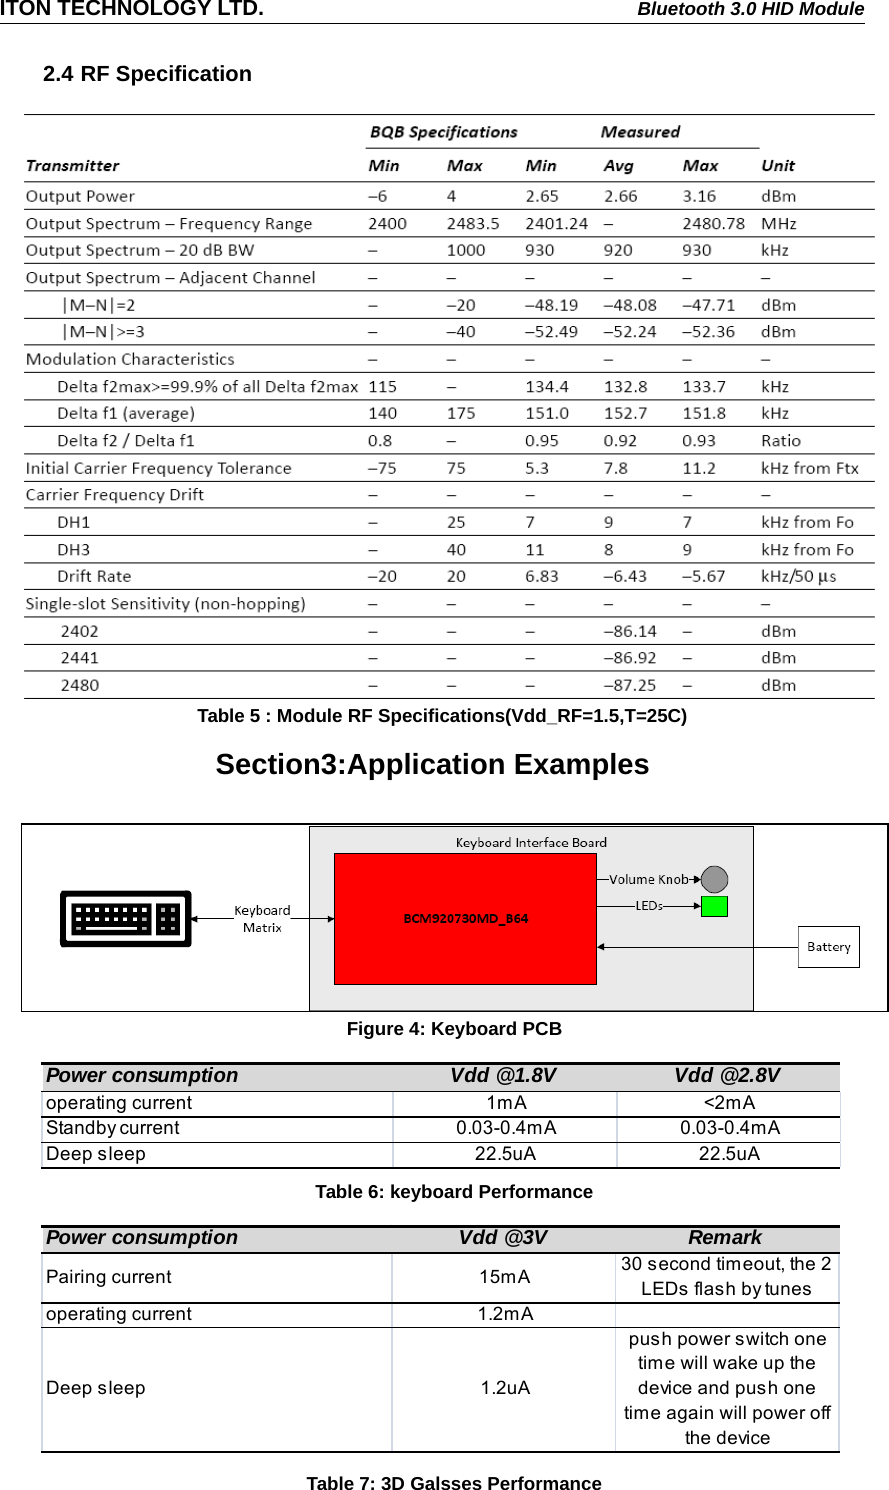 ITON TECHNOLOGY LTD. Bluetooth 3.0 HID Module2.4 RF SpecificationTable 5 : Module RF Specifications(Vdd_RF=1.5,T=25C)Section3:Application ExamplesFigure 4: Keyboard PCBTable 6: keyboard PerformanceTable 7: 3D Galsses PerformancePower consumption Vdd @1.8V Vdd @2.8Voperating current 1mA &lt;2mAStandby current 0.03-0.4mA 0.03-0.4mADeep sleep 22.5uA 22.5uAPower consumption Vdd @3V RemarkPairing current 15mA 30 second timeout, the 2LEDs flash by tunesoperating current 1.2mADeep sleep 1.2uApush power switch onetim e will wake up thedevice and push onetime again will power offthe device